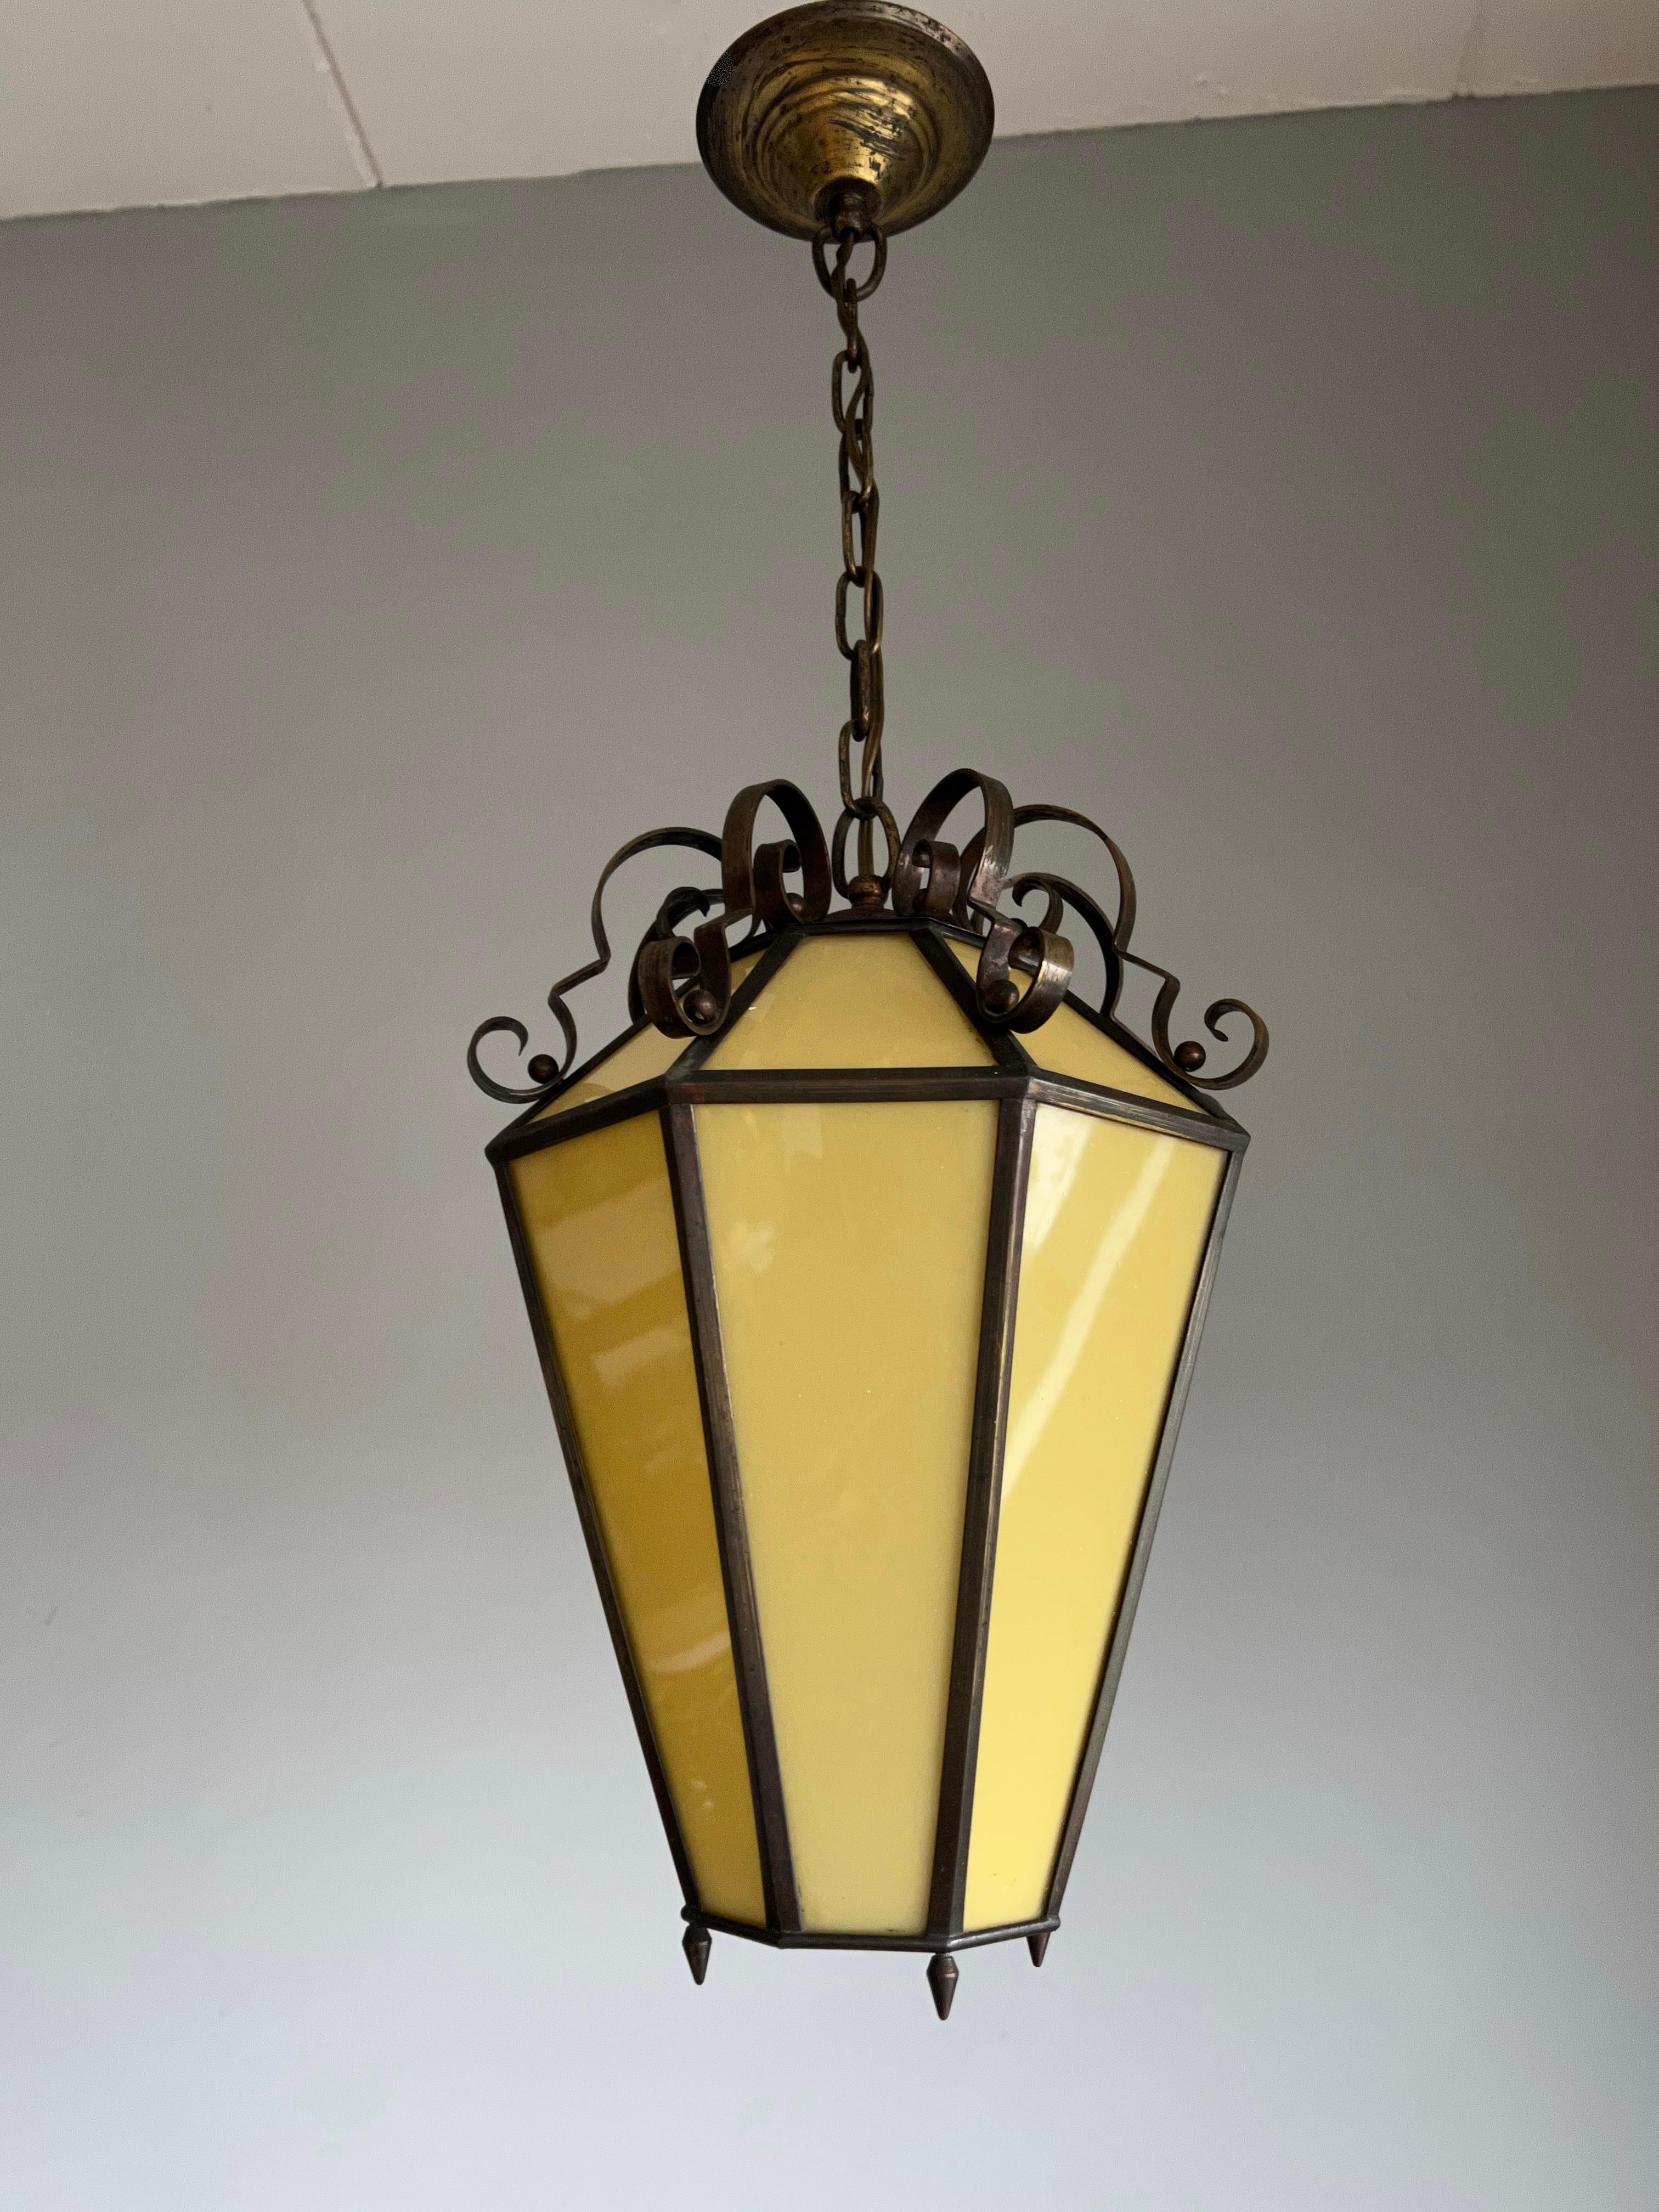 Hand-Crafted Art Deco Brass and Italian Glass Octagonal Design Pendant Light / Hall Lantern For Sale